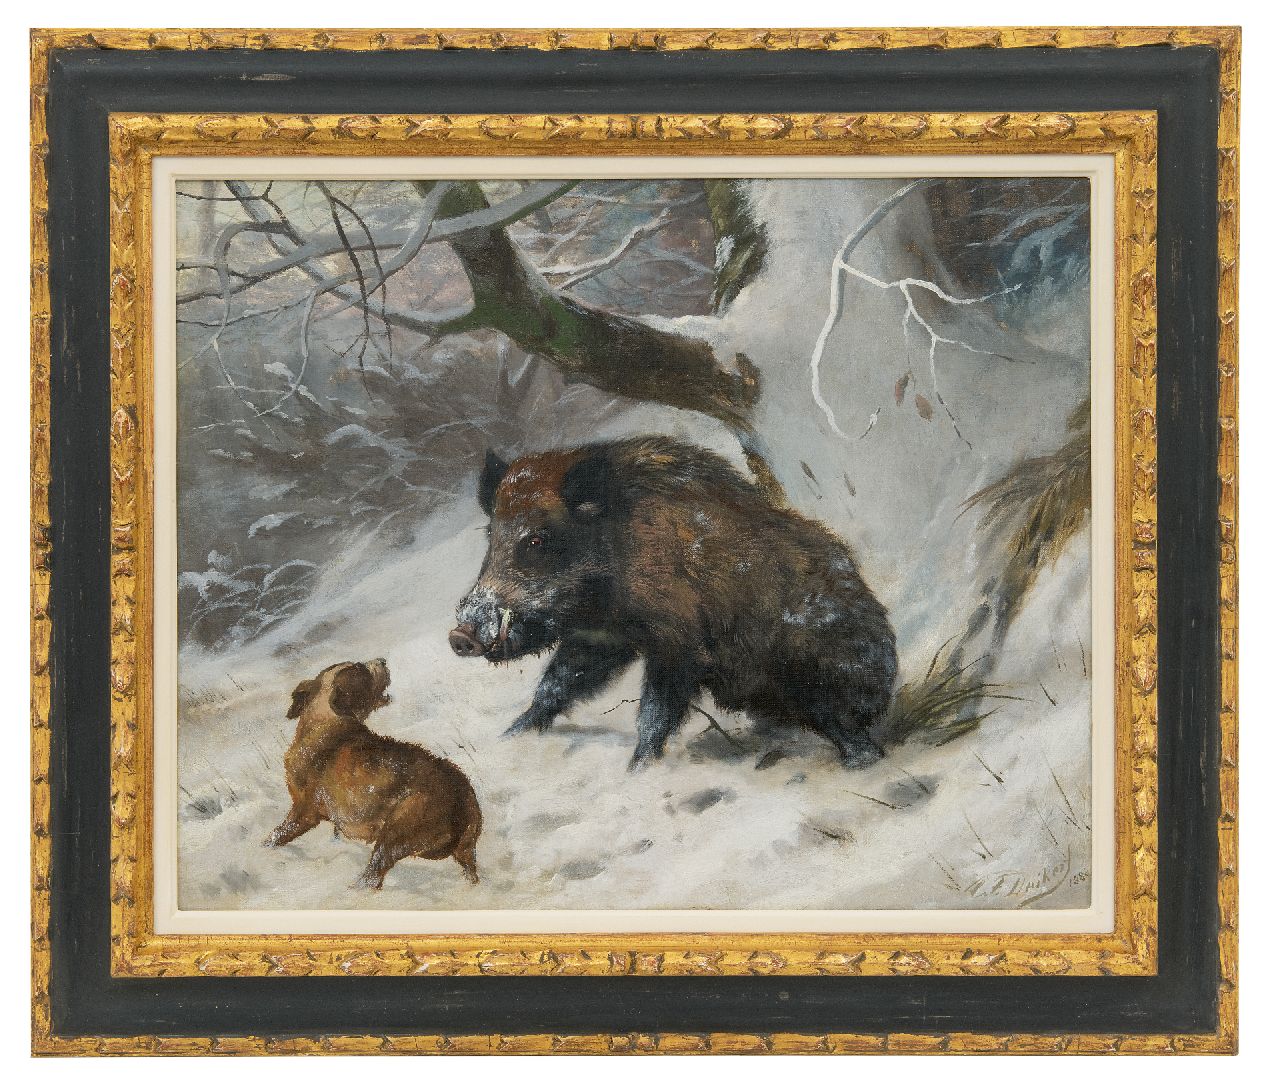 Deiker C.F.  | Carl Friedrich Deiker | Paintings offered for sale | Hound tracking down a wild boar, oil on canvas 40.2 x 49.8 cm, signed l.r. and dated 1888